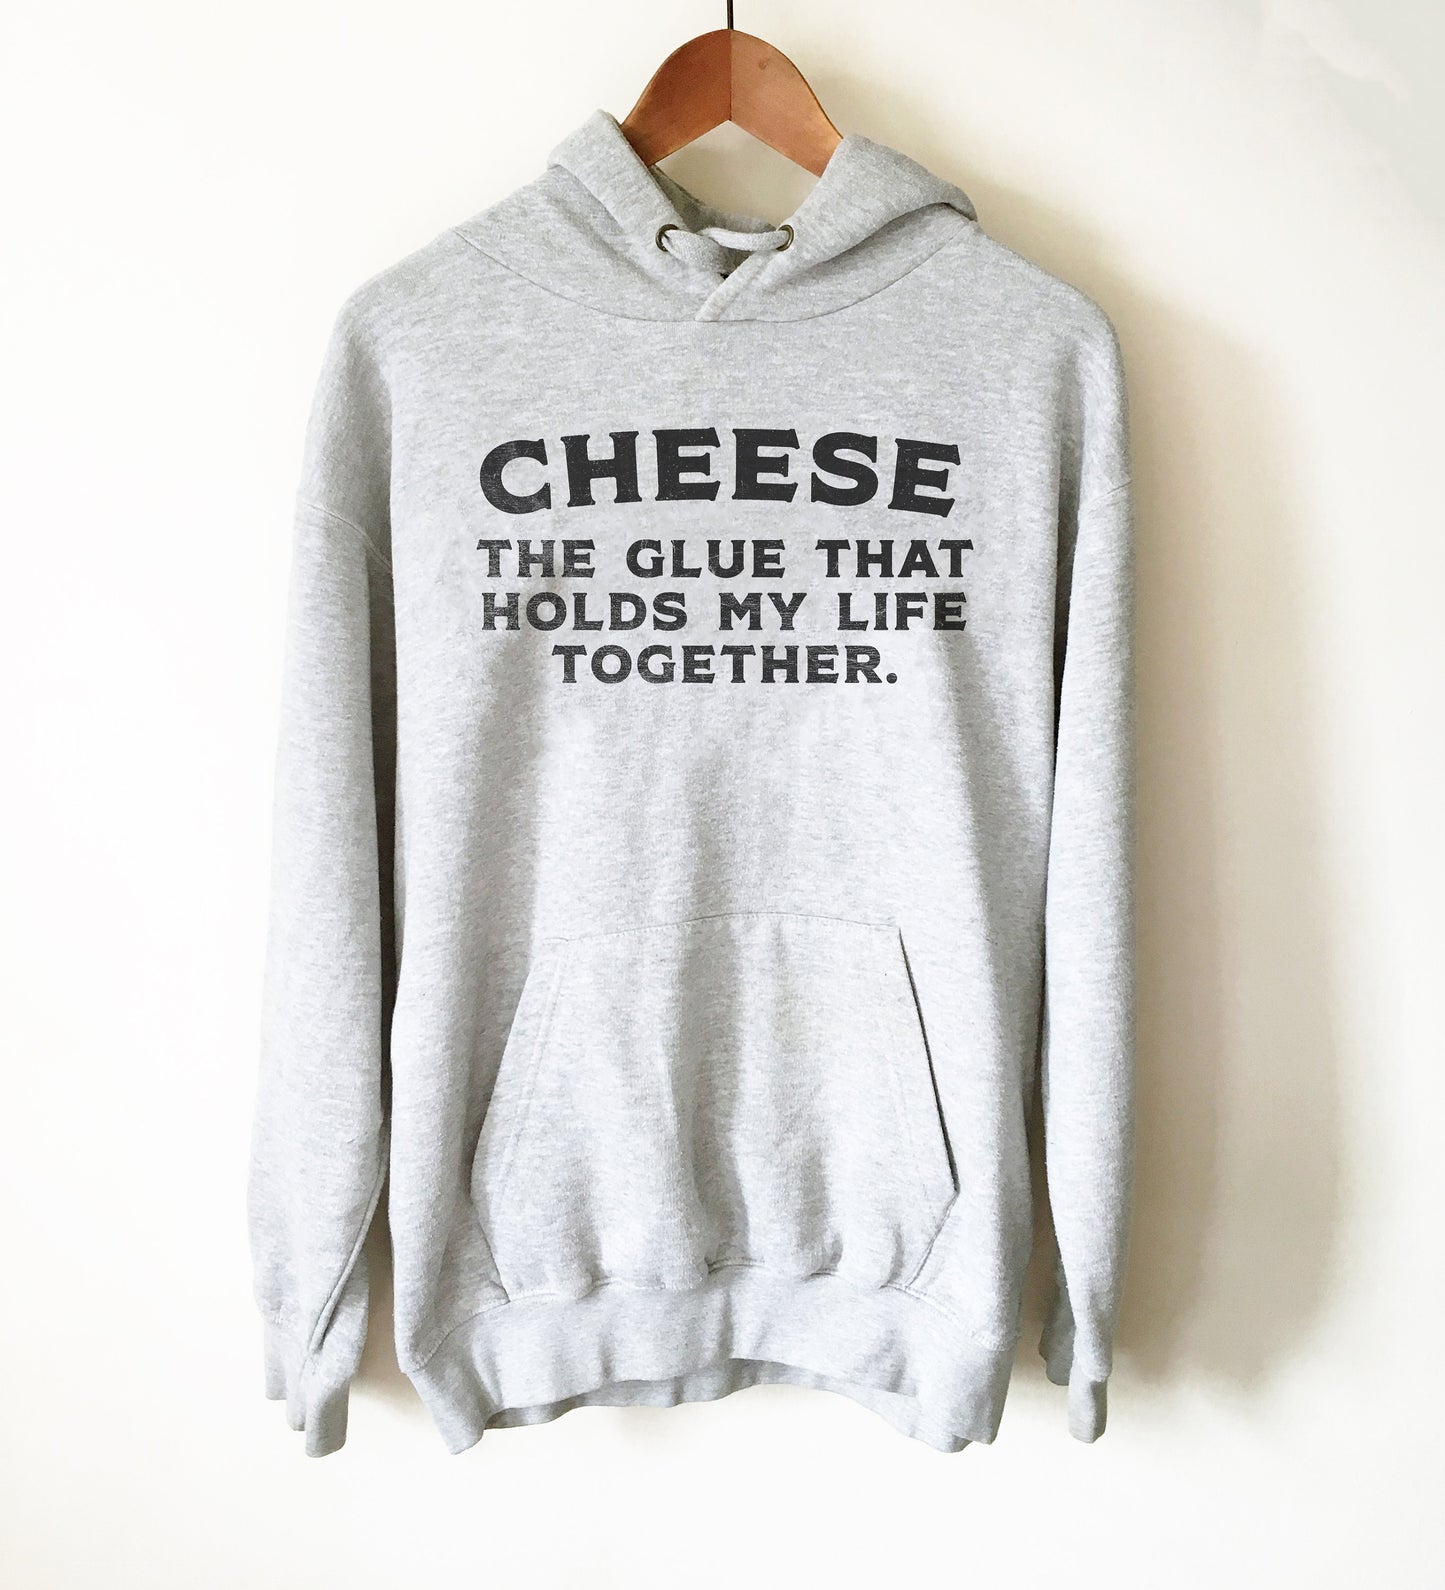 Cheese The Glue That Holds My Life Together Hoodie - Cheese Shirt, Cheese Lover, Foodie Gift, Foodie Shirt, Chef Gift, Funny Food Gift